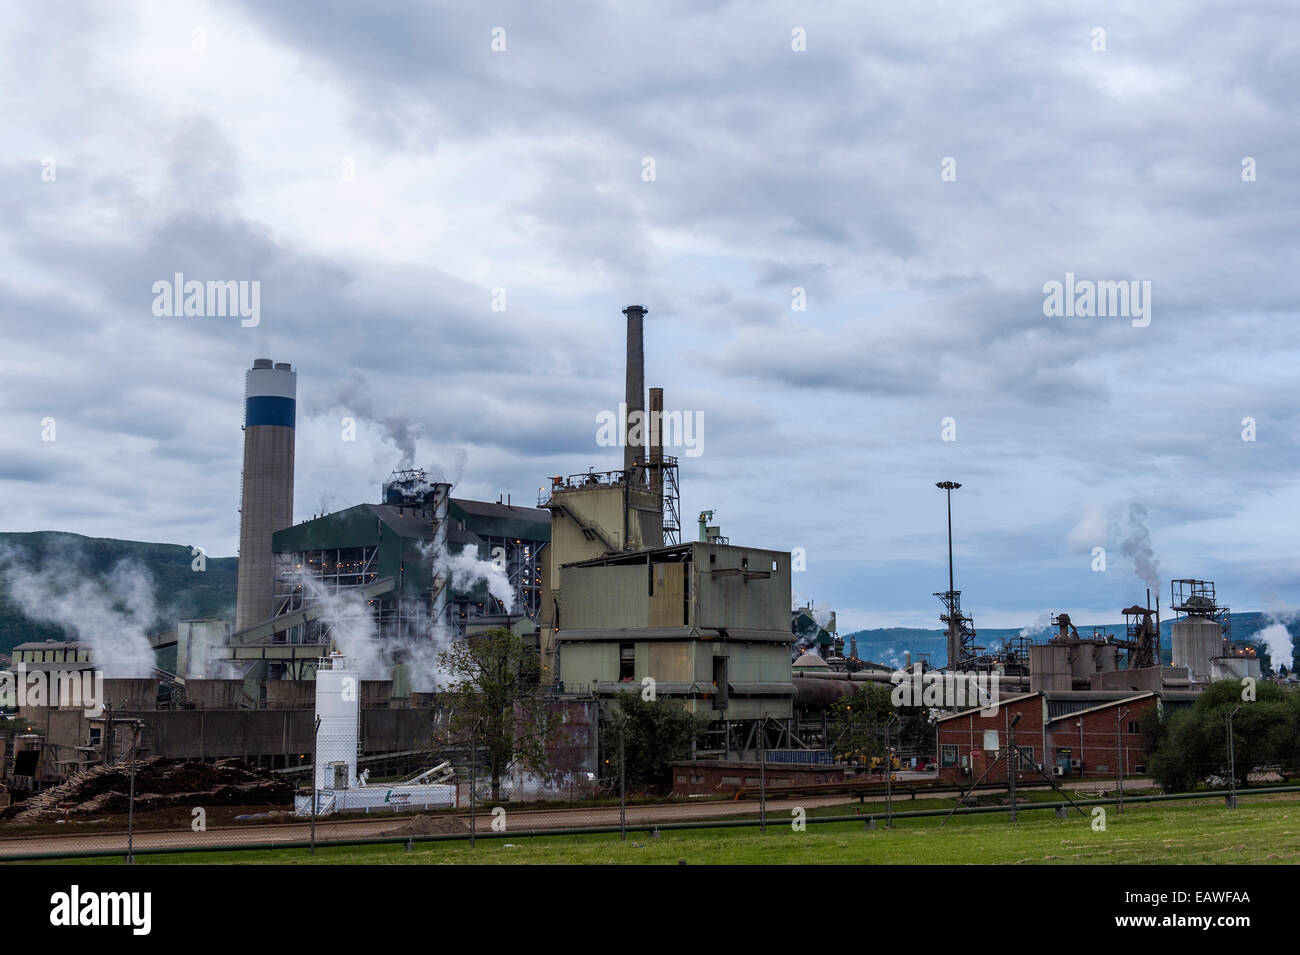 Smoke and steam pollution belch from chimneys in a paper mill. Stock Photo